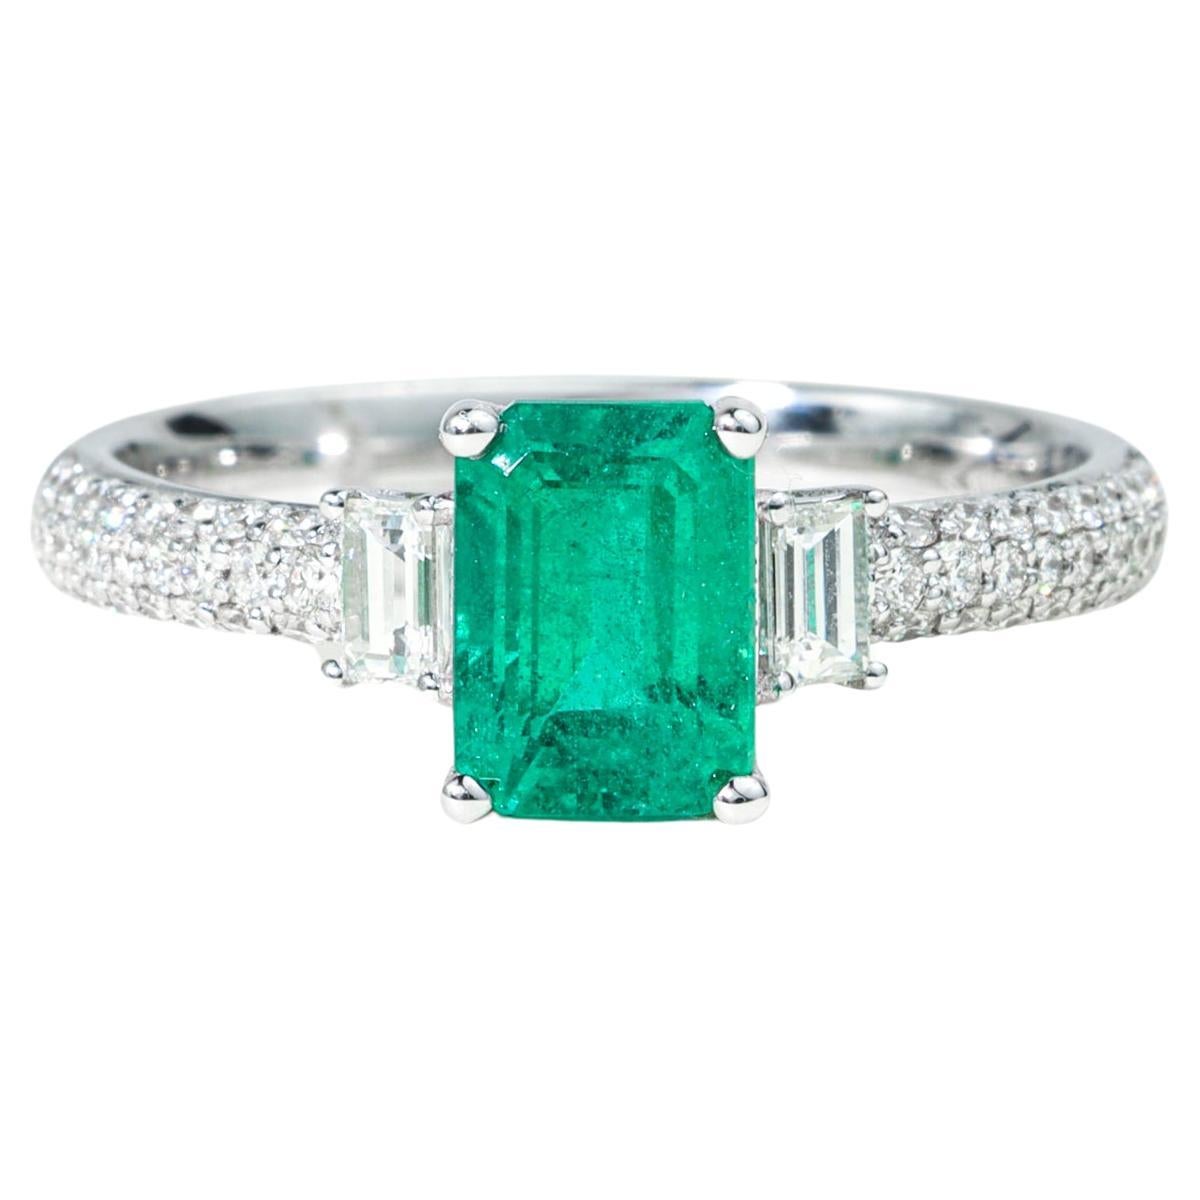 Emerald Cut Natural Emerald Diamond Cocktail Engagement Ring 18k White Gold